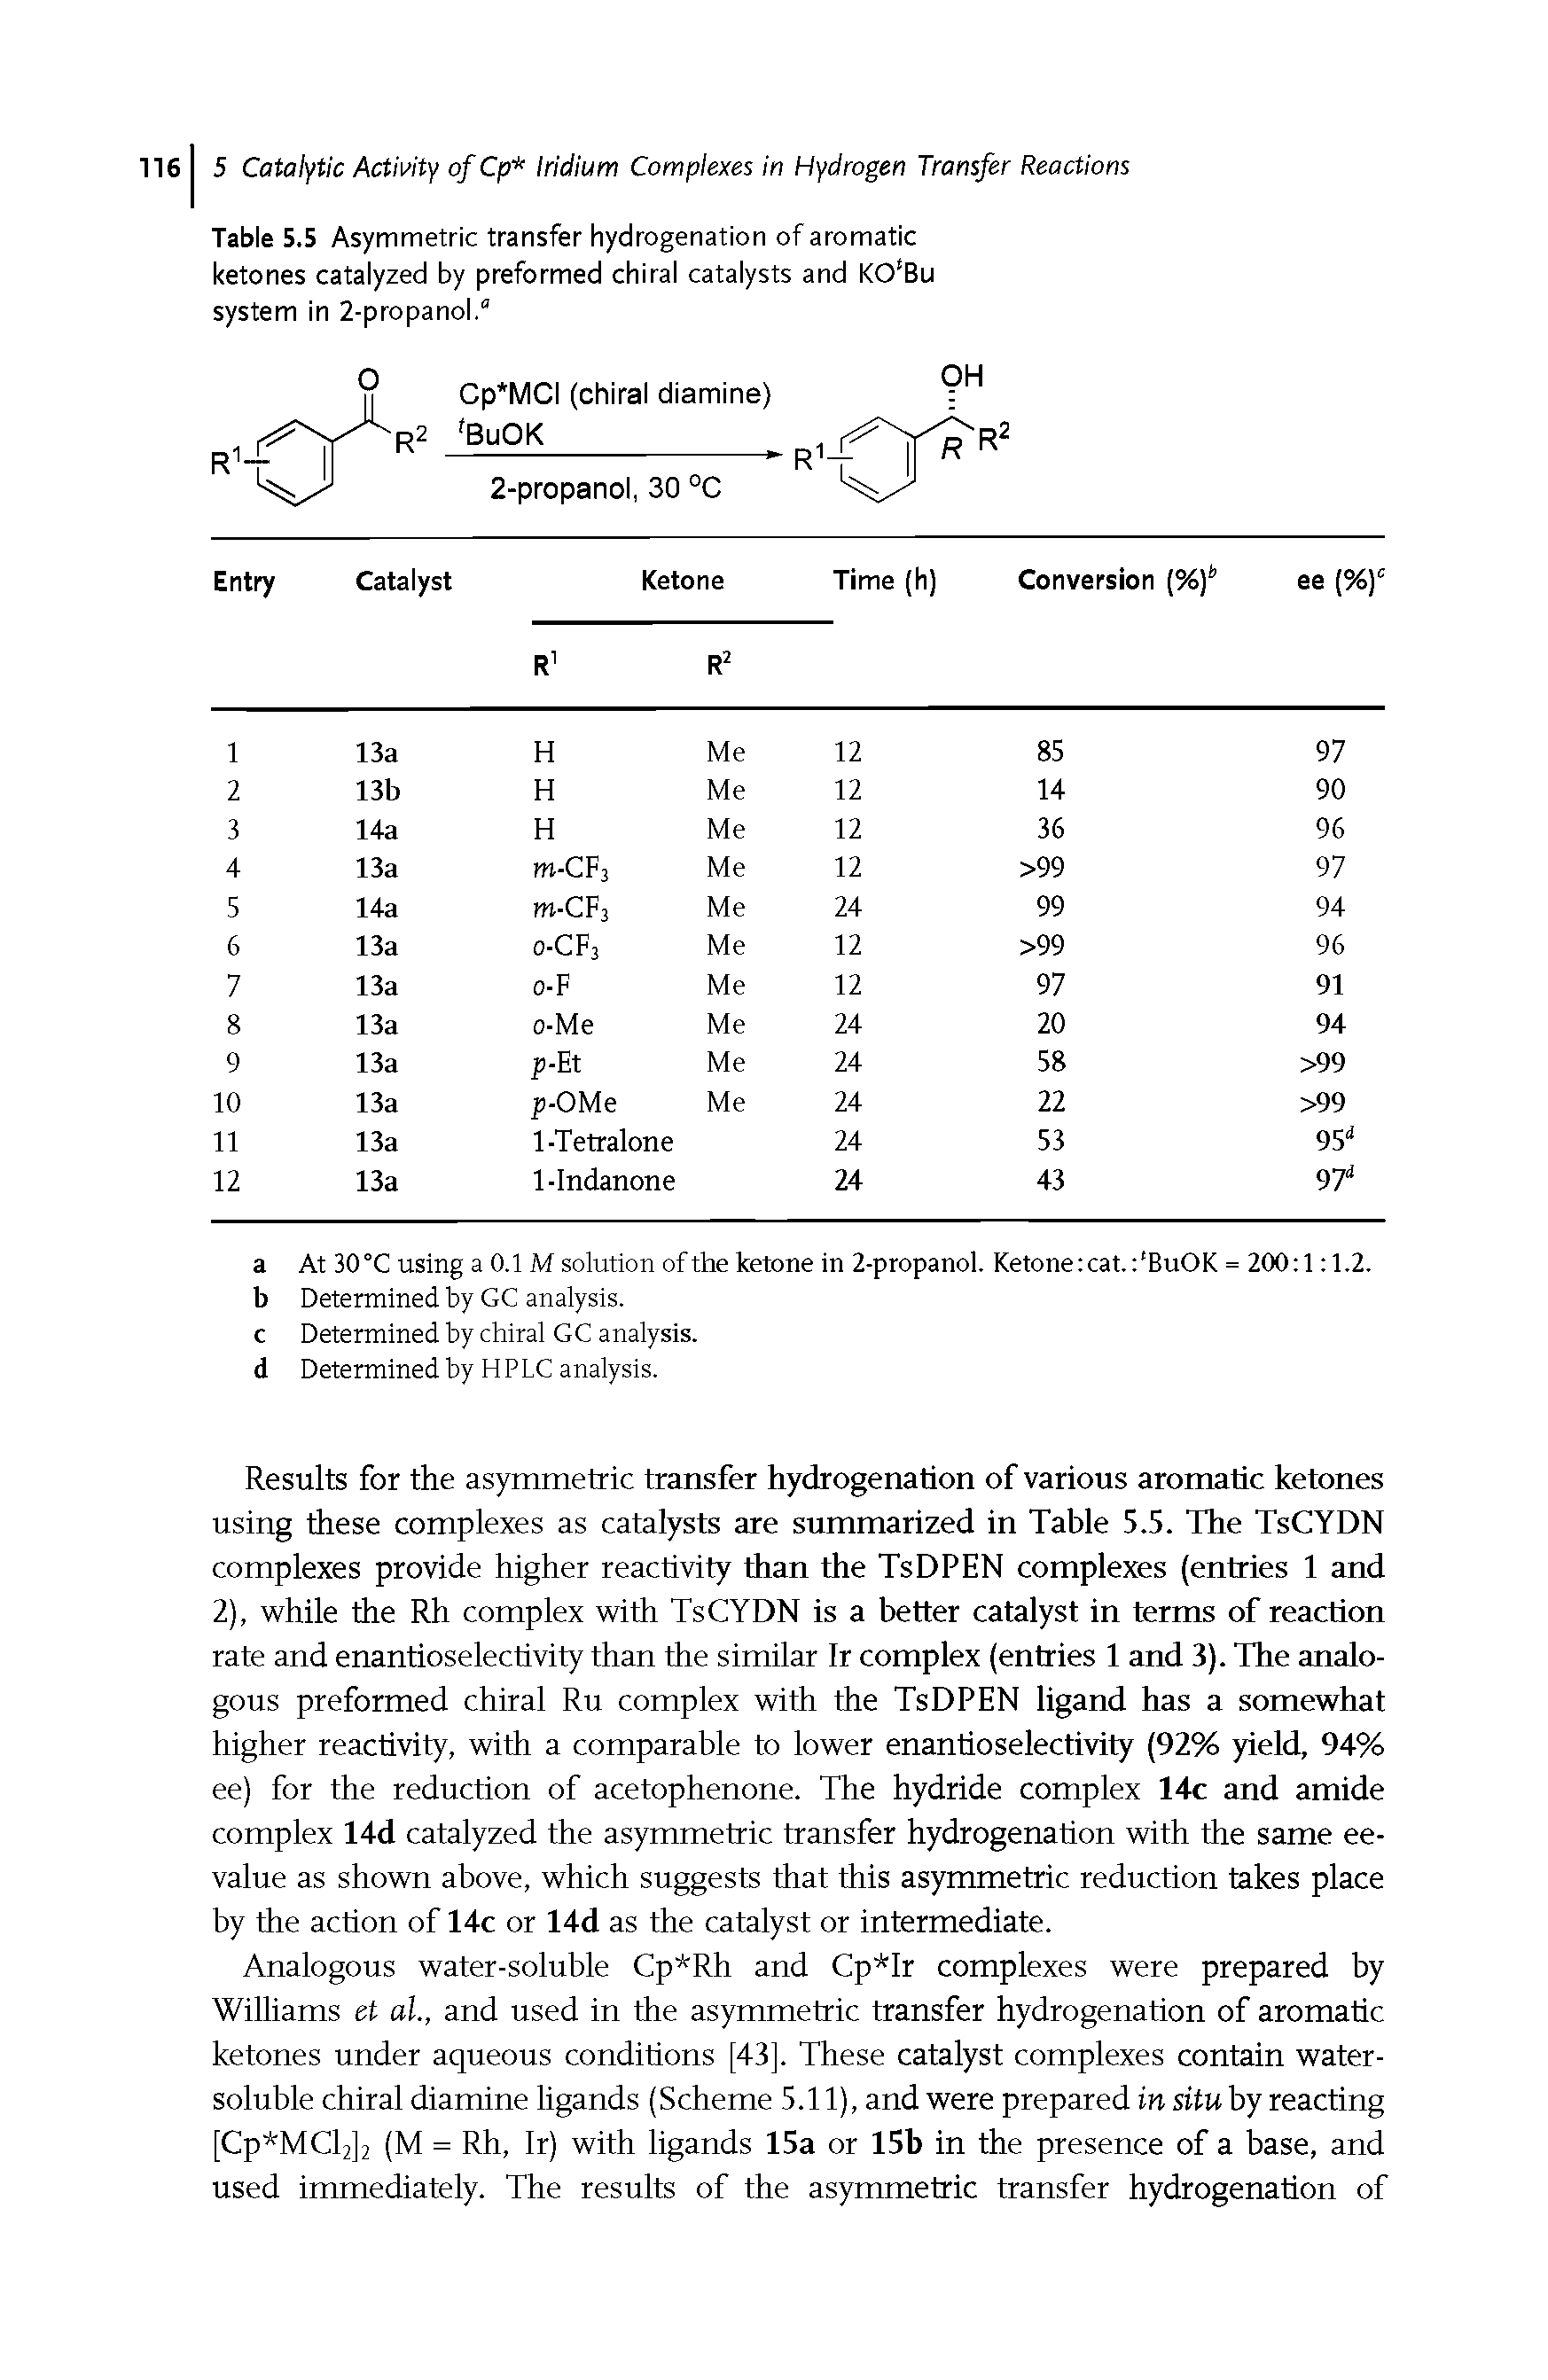 Table 5.5 Asymmetric transfer hydrogenation of aromatic ketones catalyzed by preformed chiral catalysts and KO Bu system in 2-propanol. ...